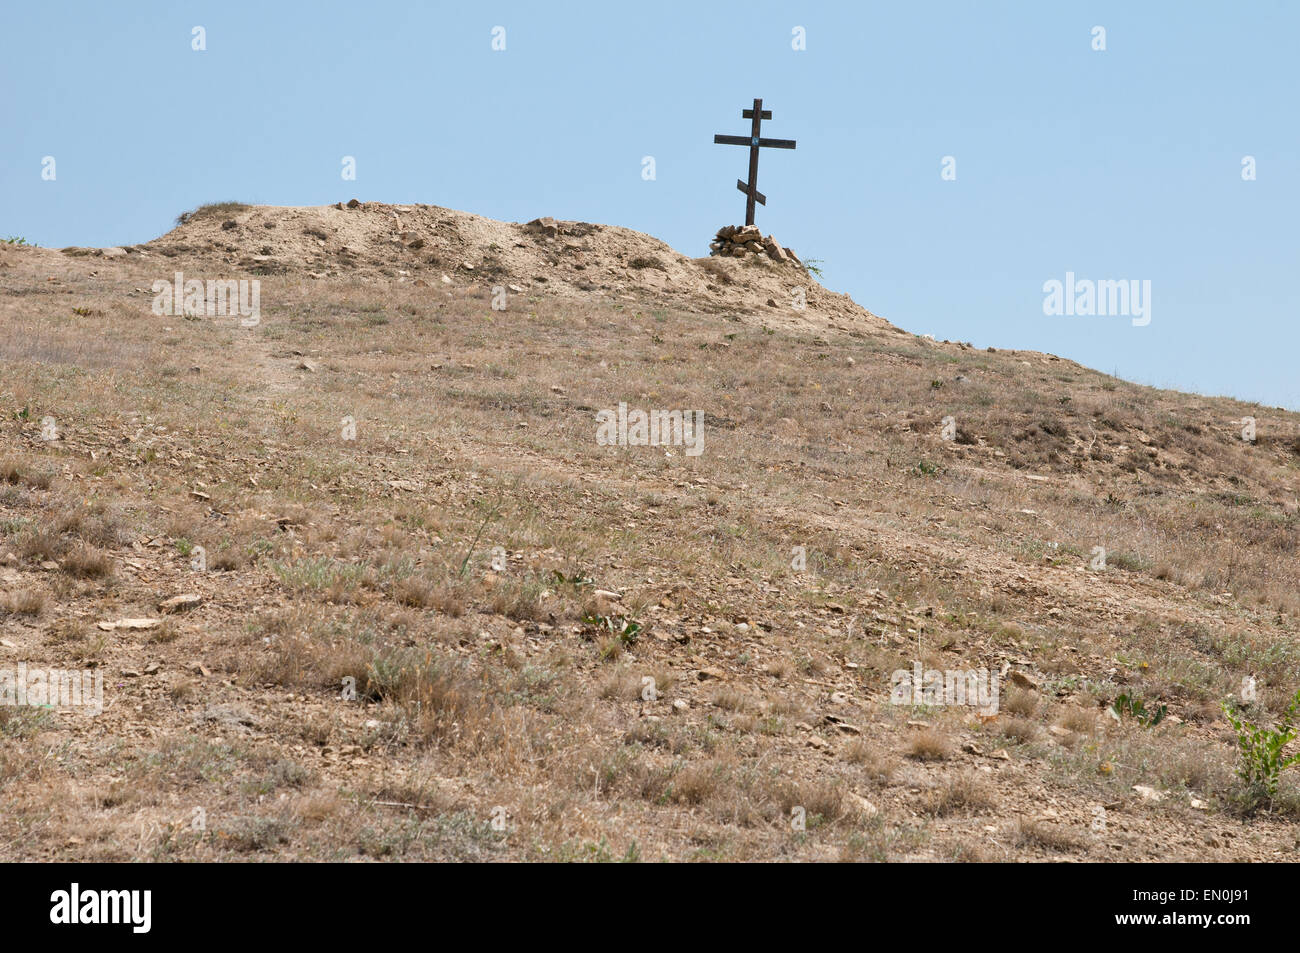 wooden cross on a lifeless dry hill Stock Photo